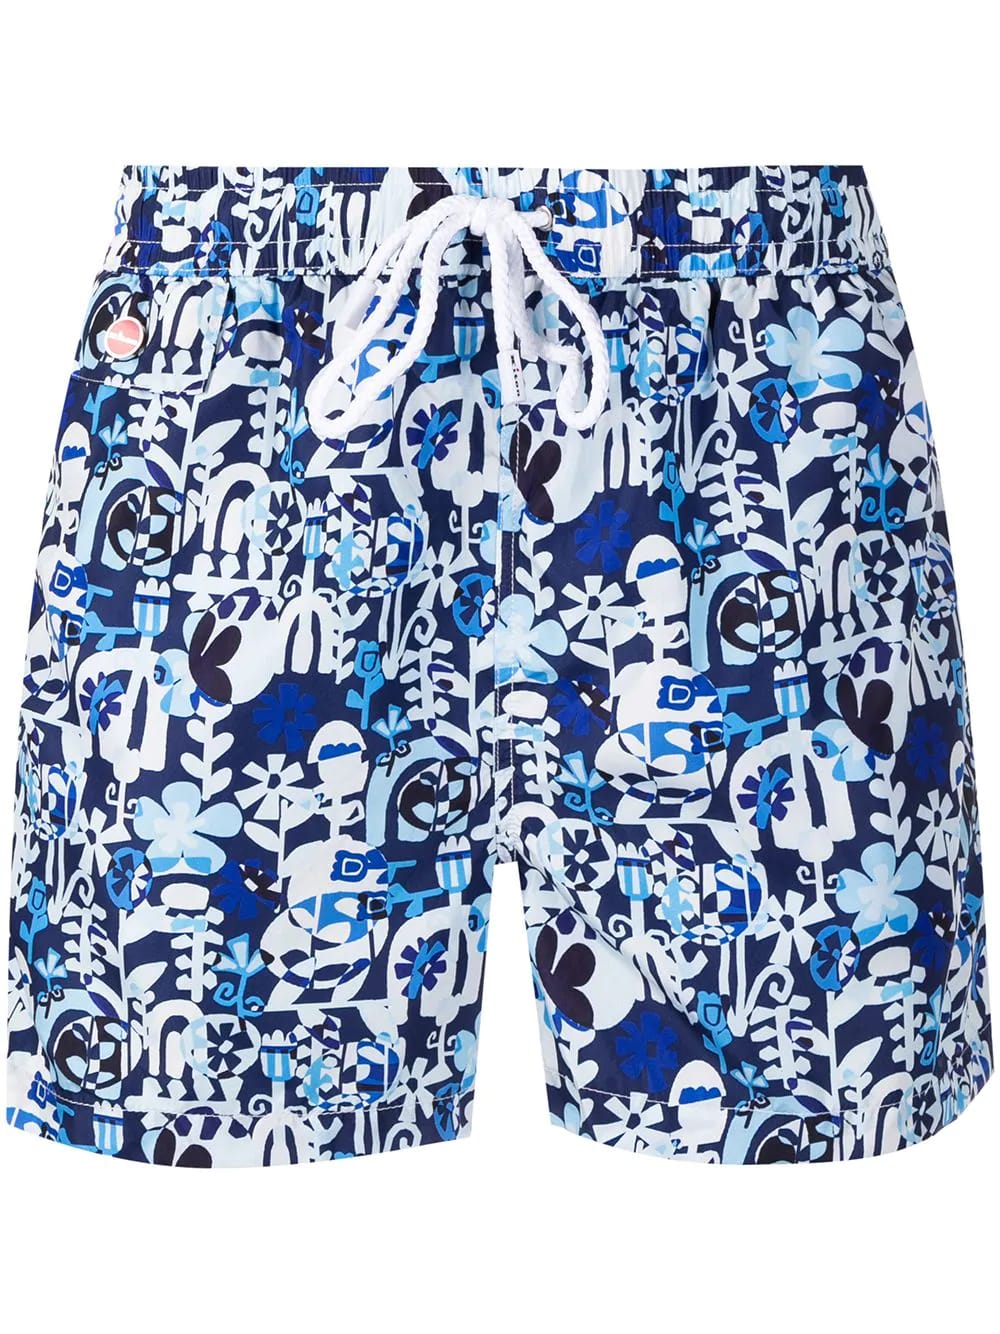 Kiton Blue Swimsuit With Light Blue And White Floral Print